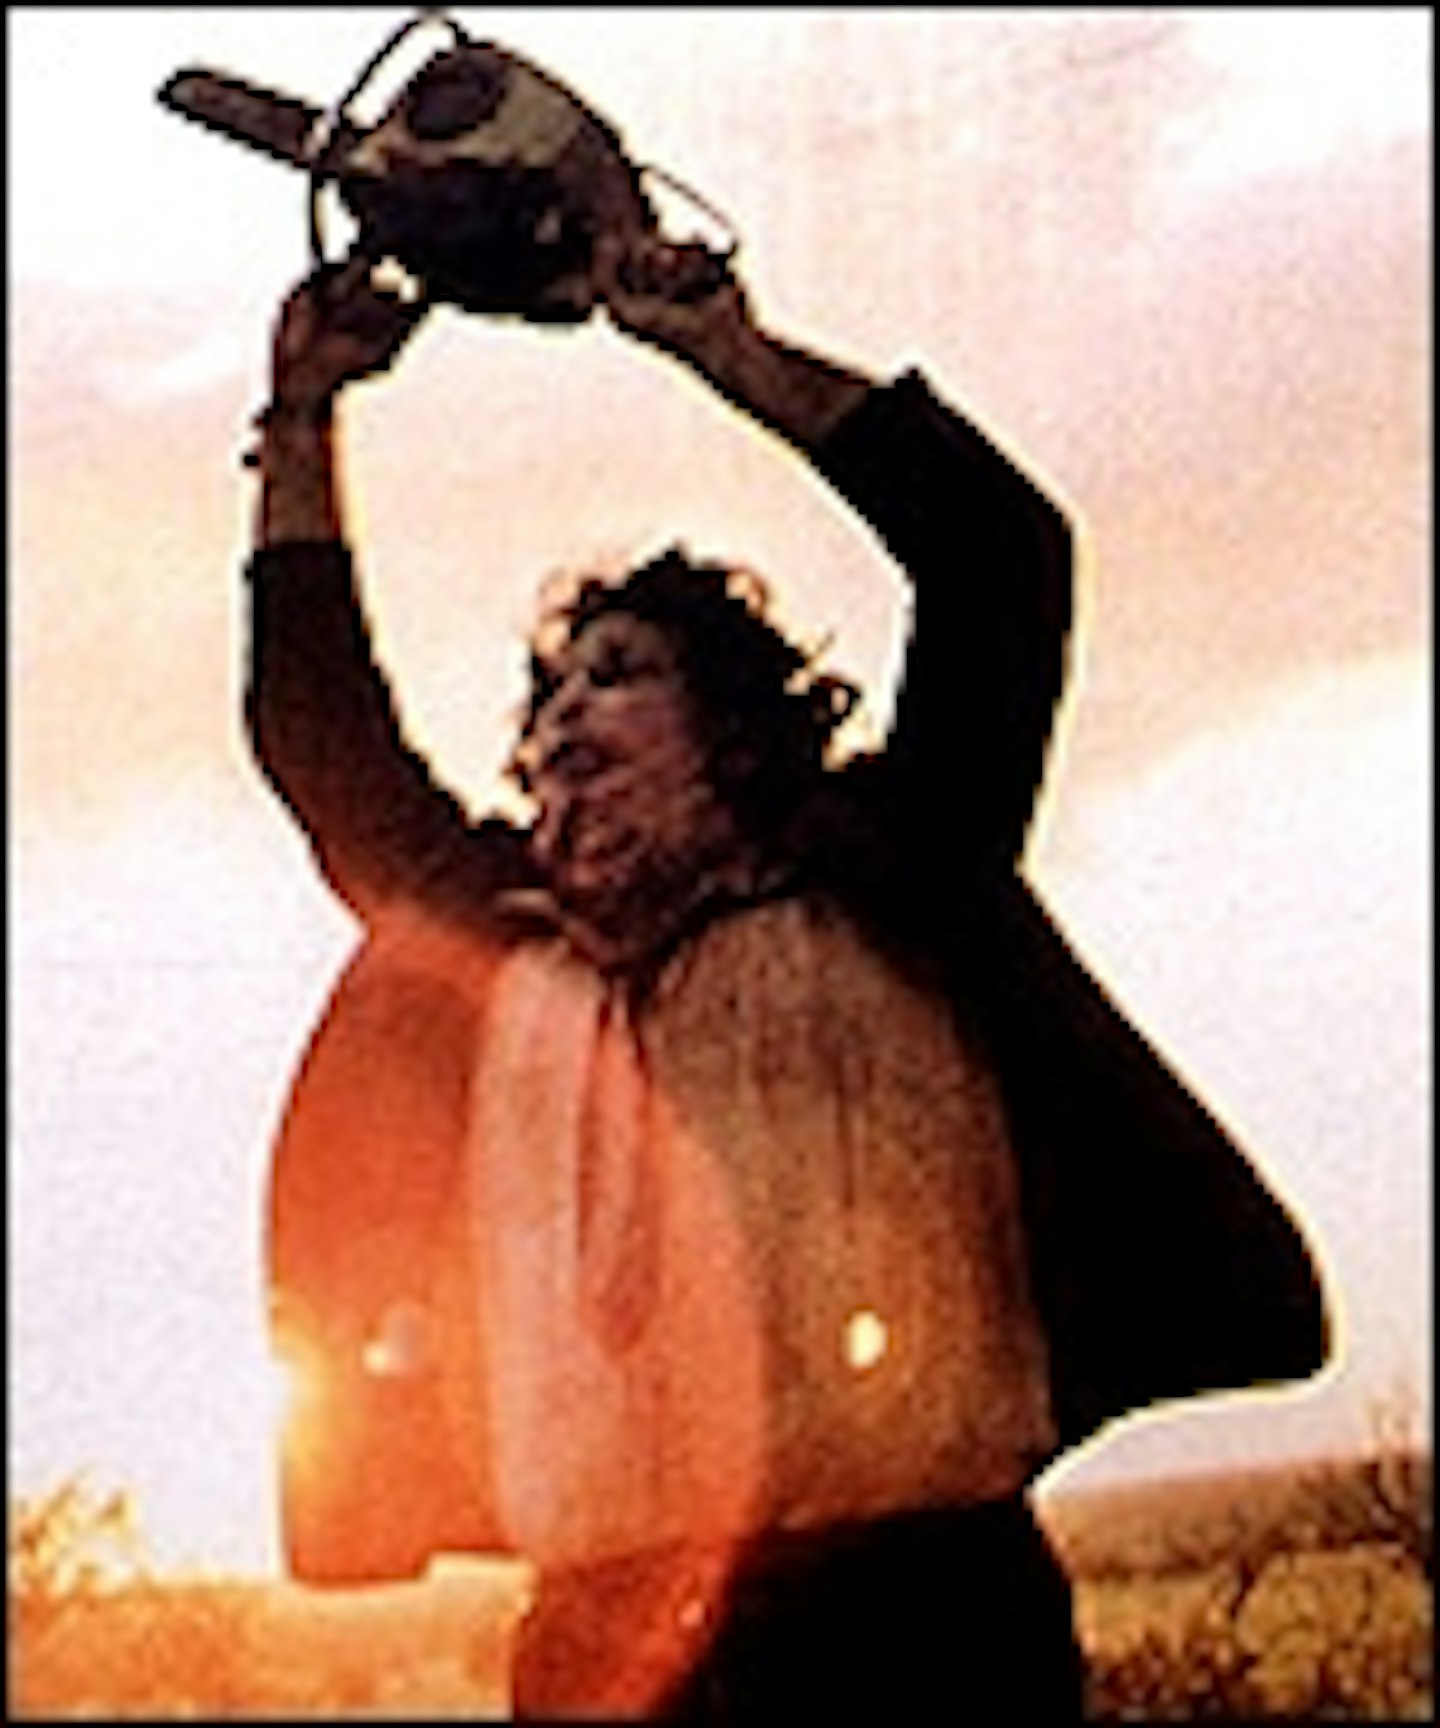 Latest Texas Chainsaw Film Is Now Called Leatherface